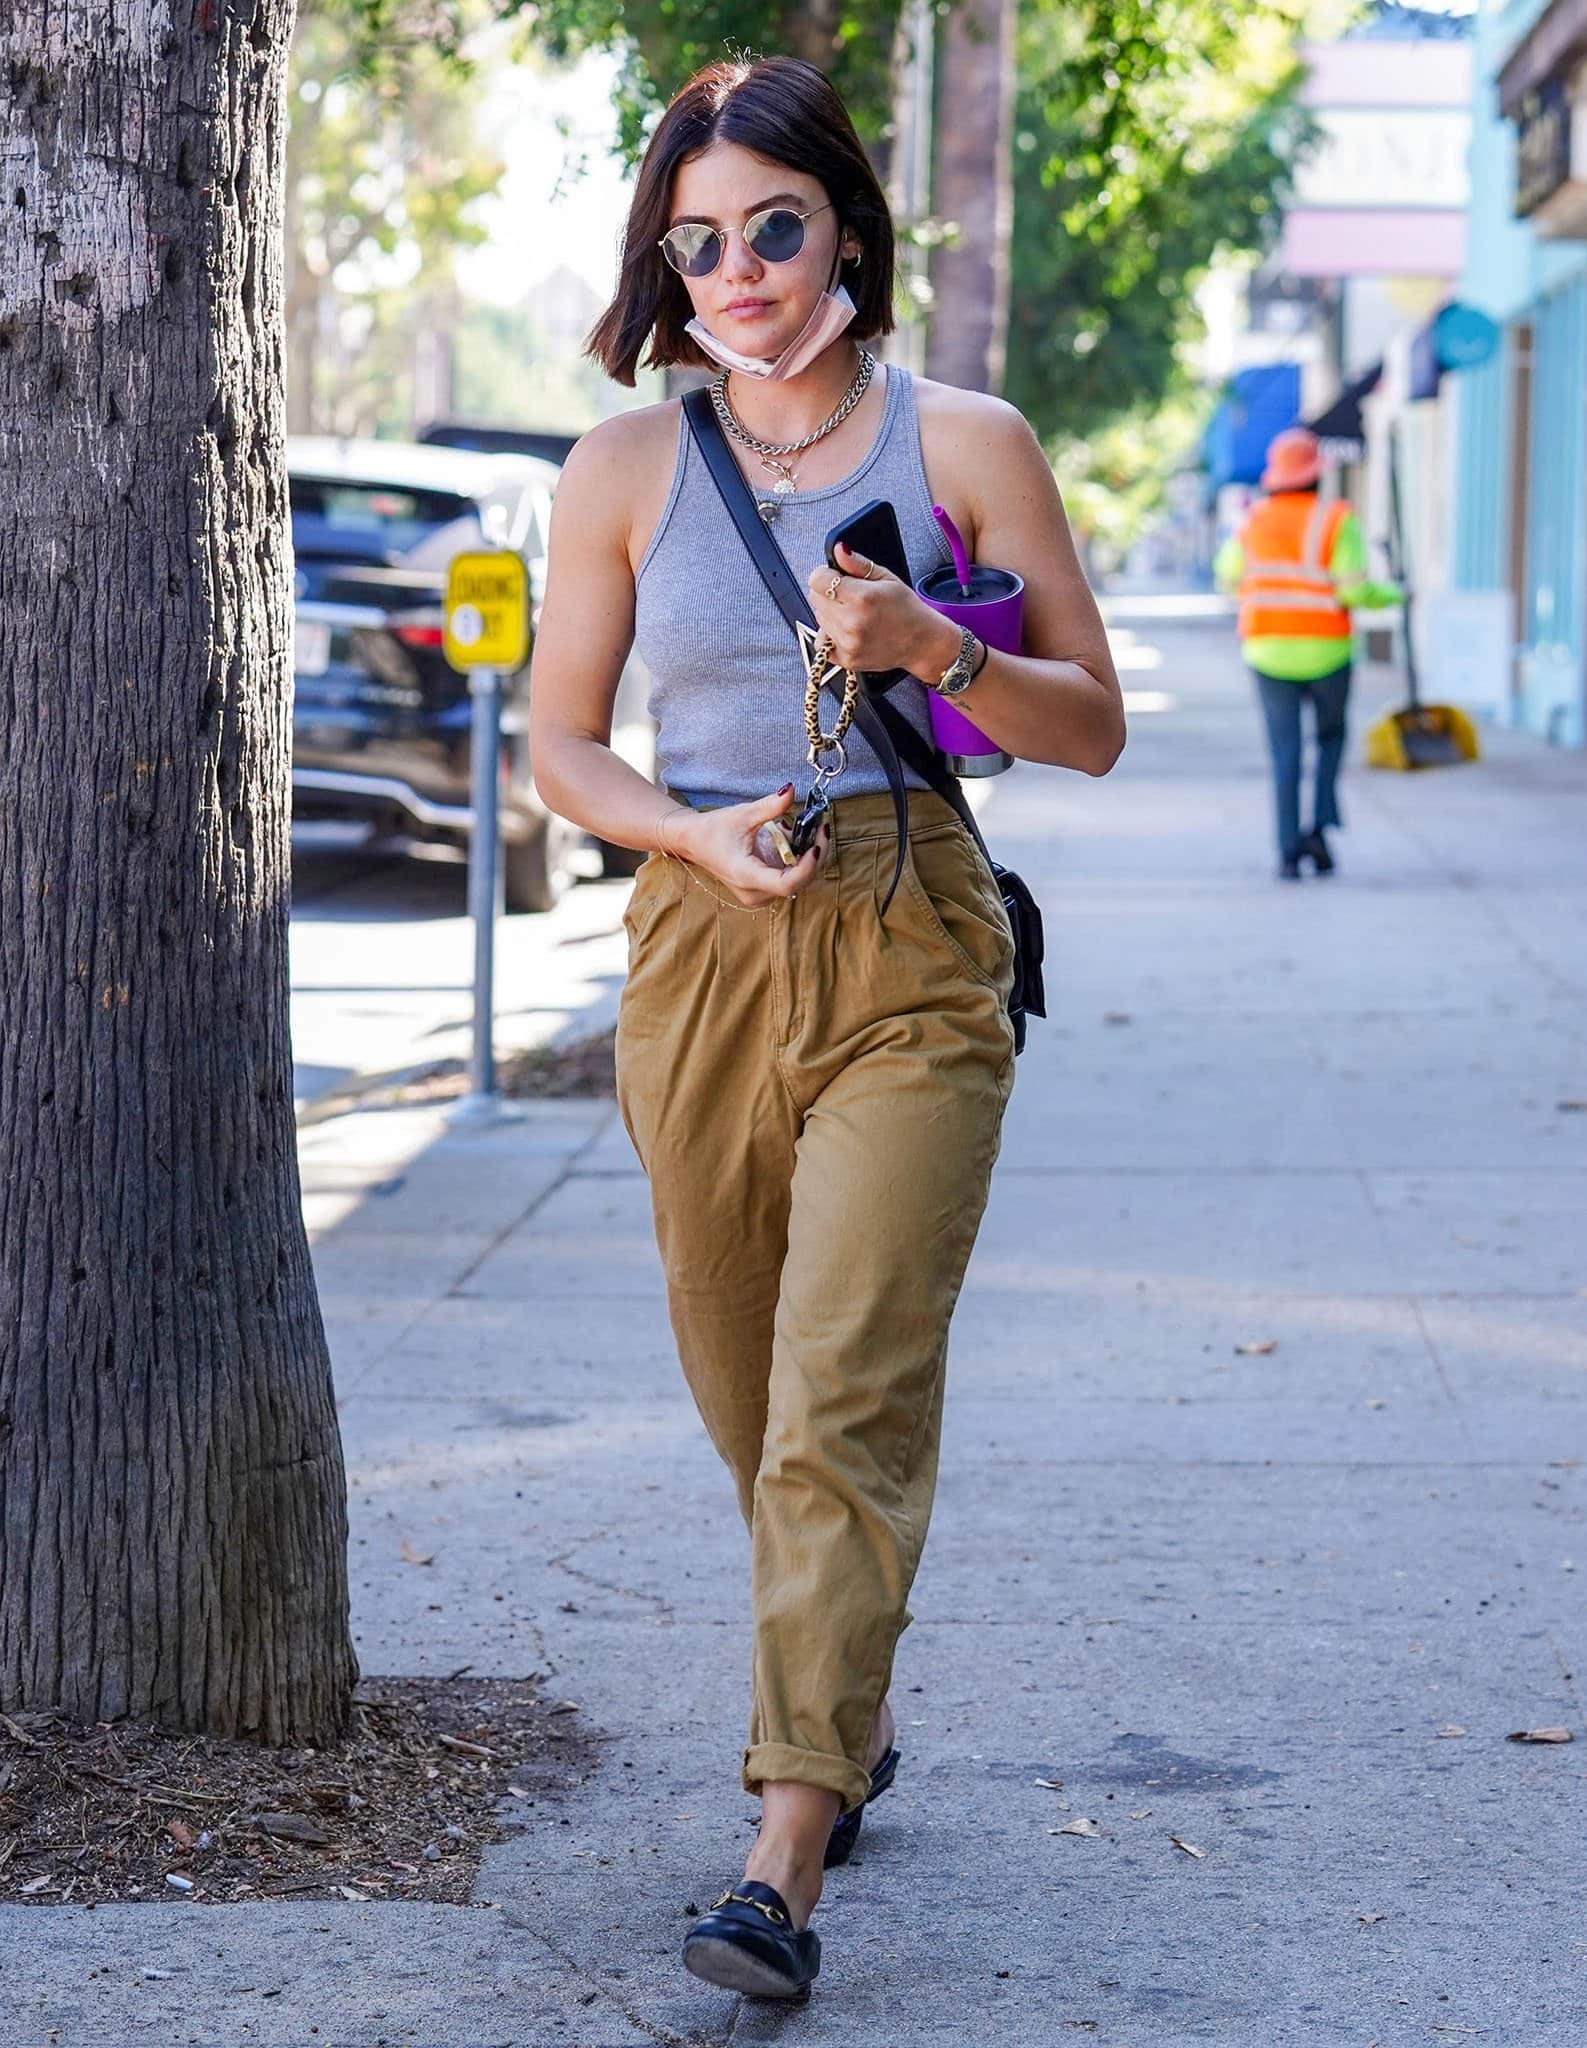 Lucy Hale looks chic in a gray tank top with baggy khaki pants while out and about in Los Angeles on September 14, 2021